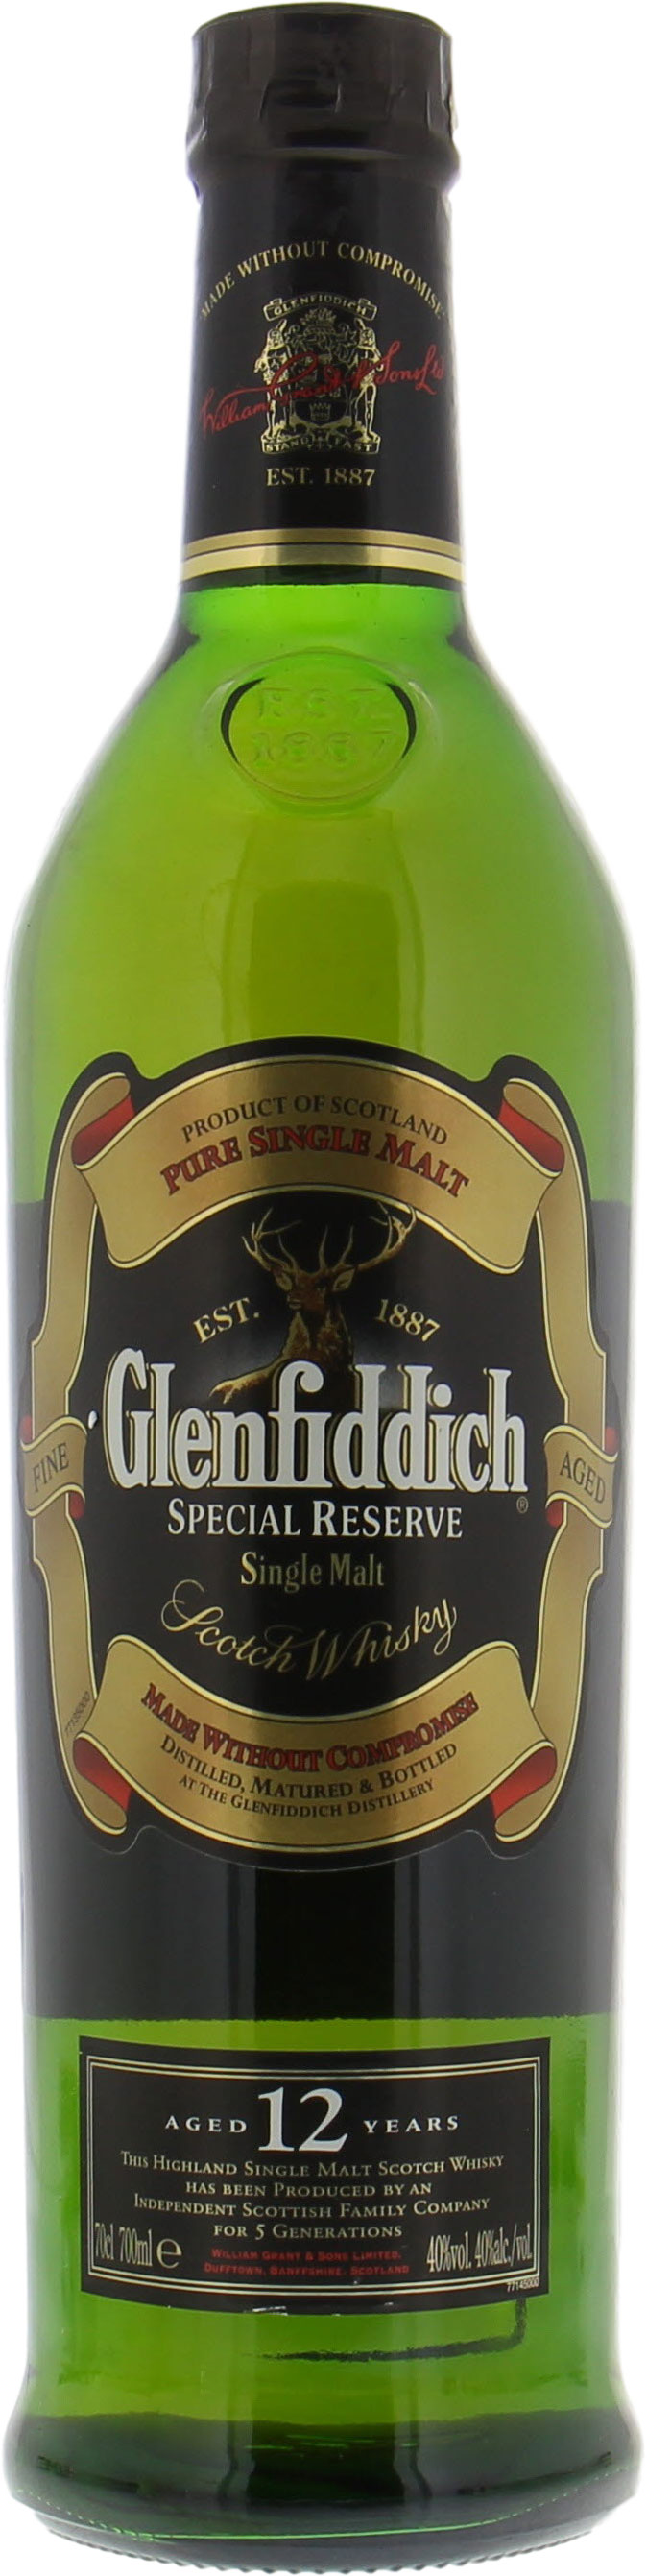 Glenfiddich - 12 Years Old Special Reserve 40% NV No Original Container Included!